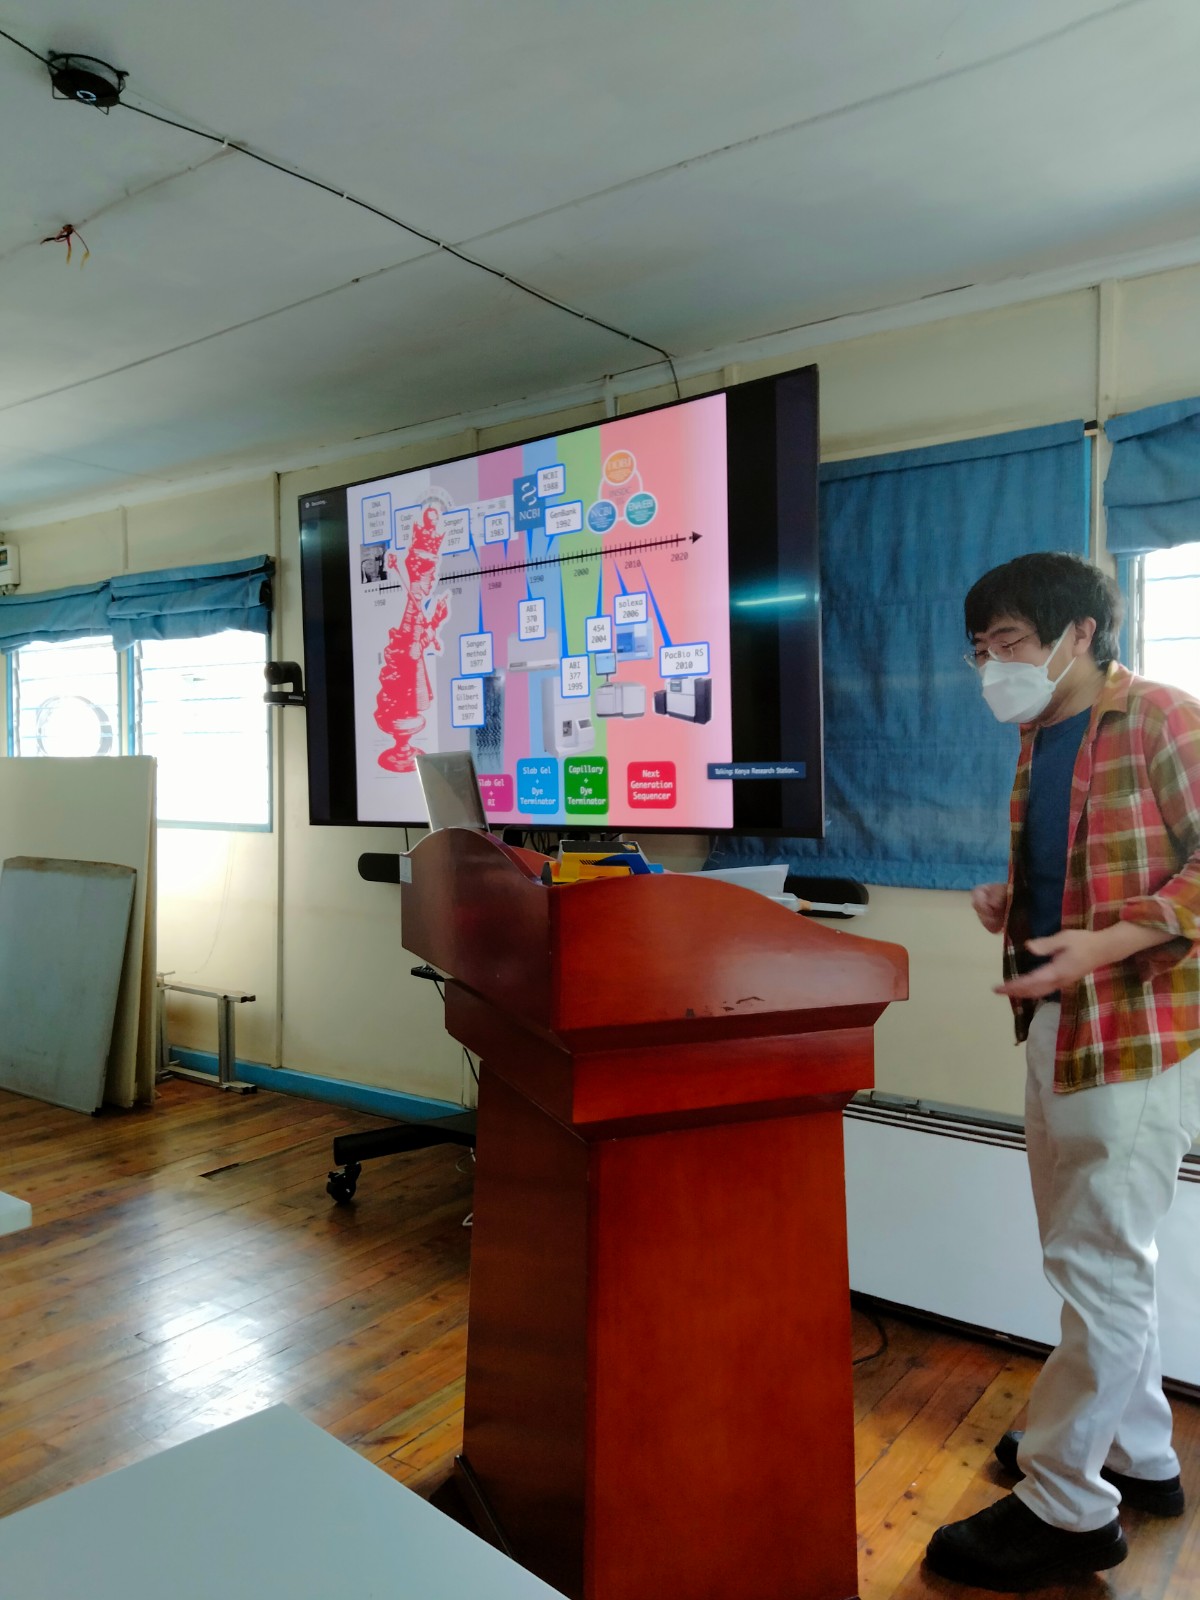 Assistant Professor, Takeshi Nabeshima arrived in Kenya and gave a lecture at Kenya Research Station, on 2nd June 2022